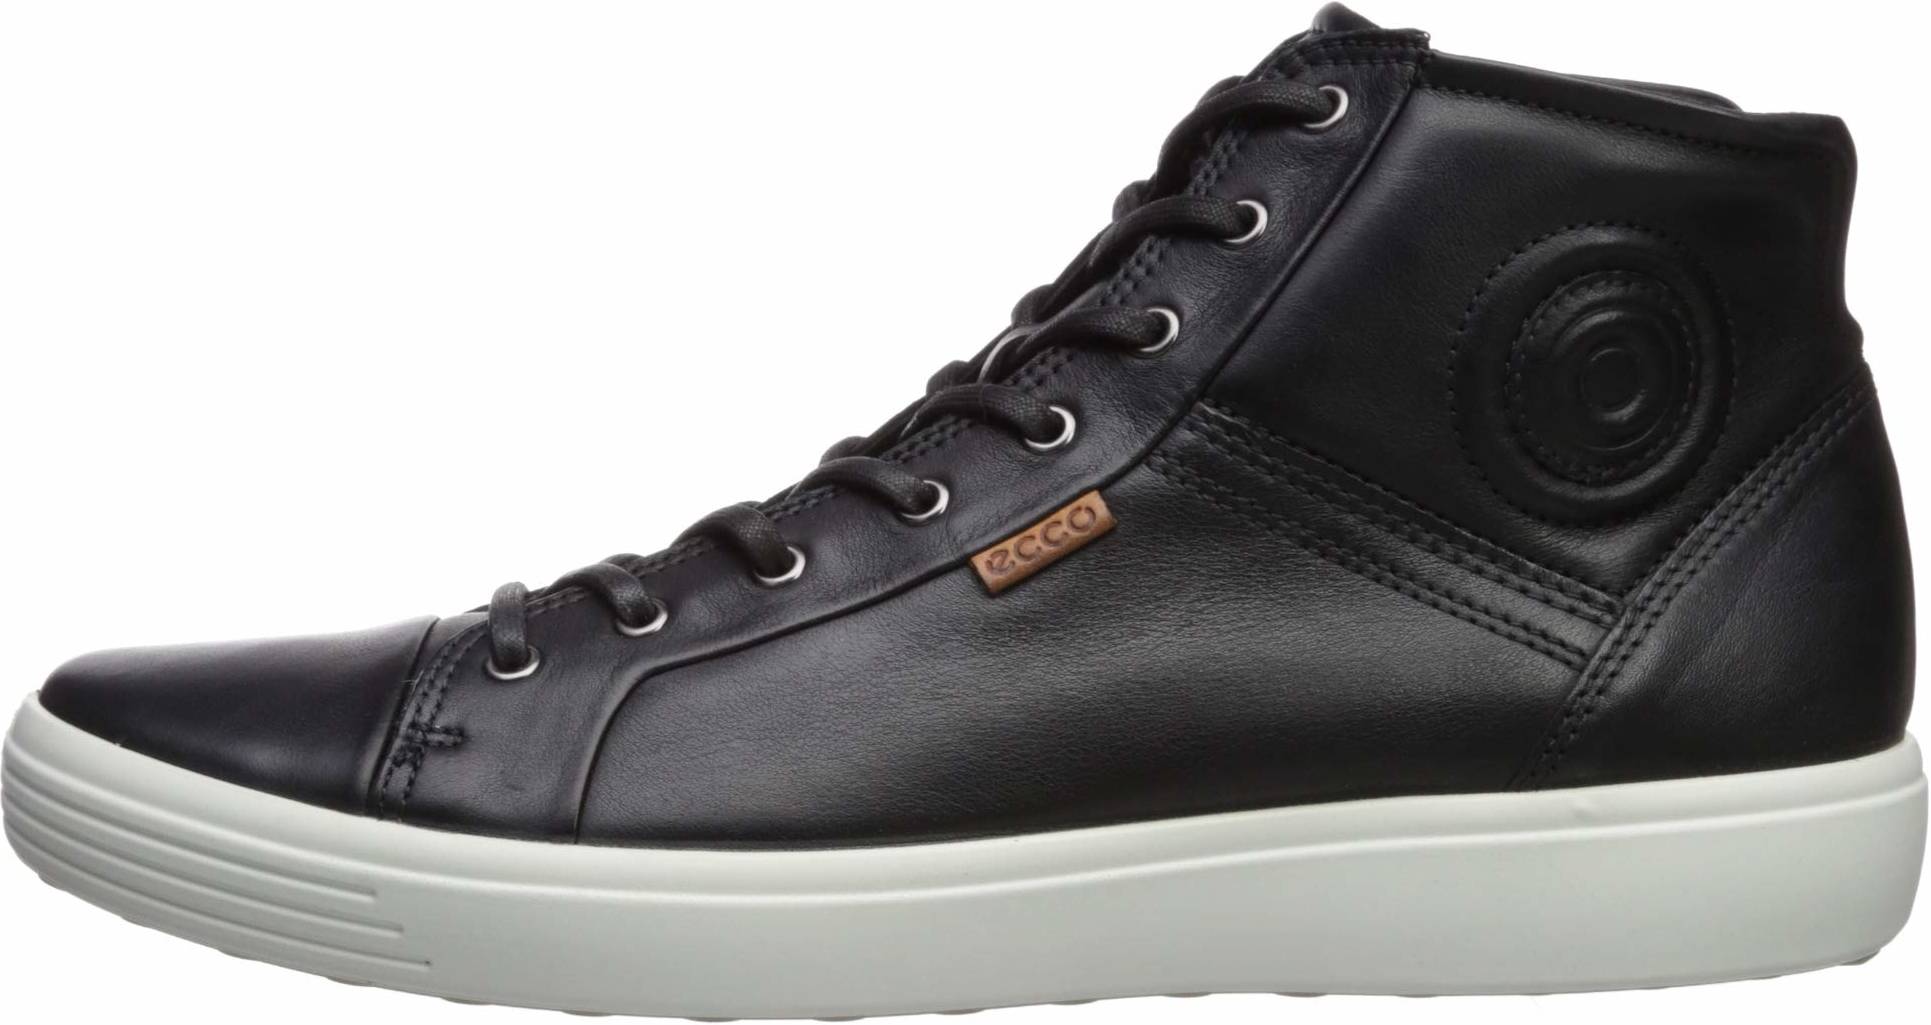 $188 + Review of Ecco Soft 7 High Top 